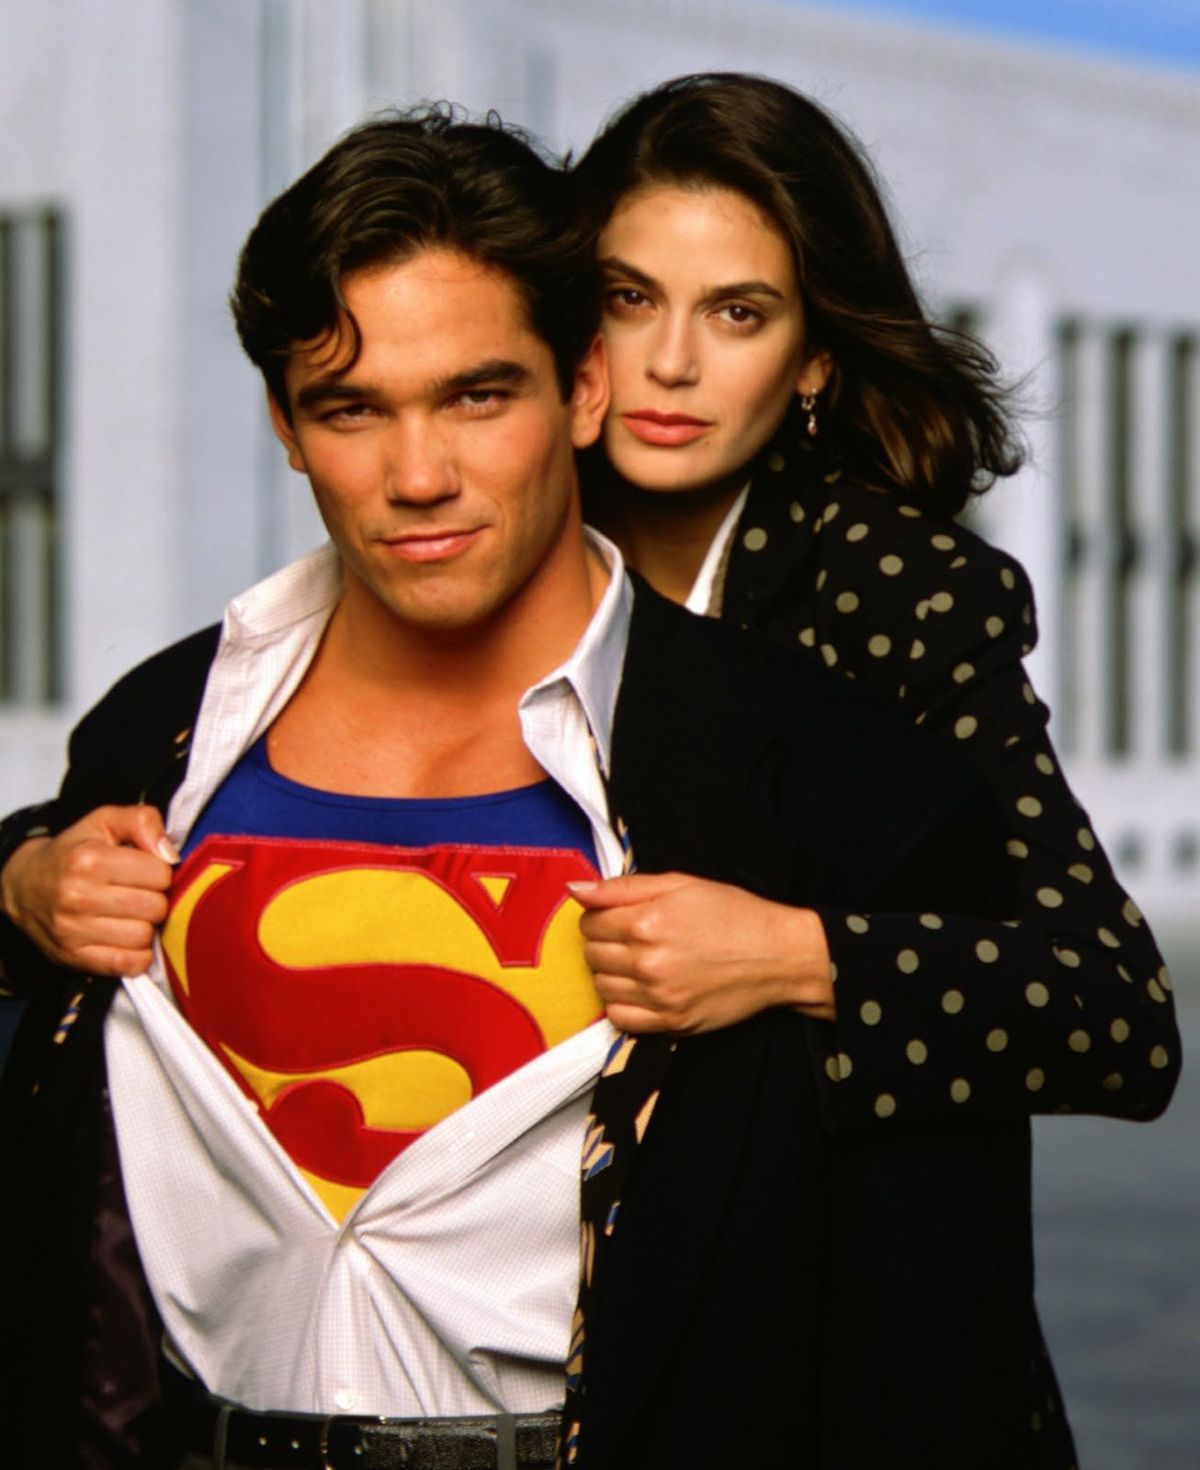 TV Legends: What was Up with the Baby in the Lois and Clark Finale?